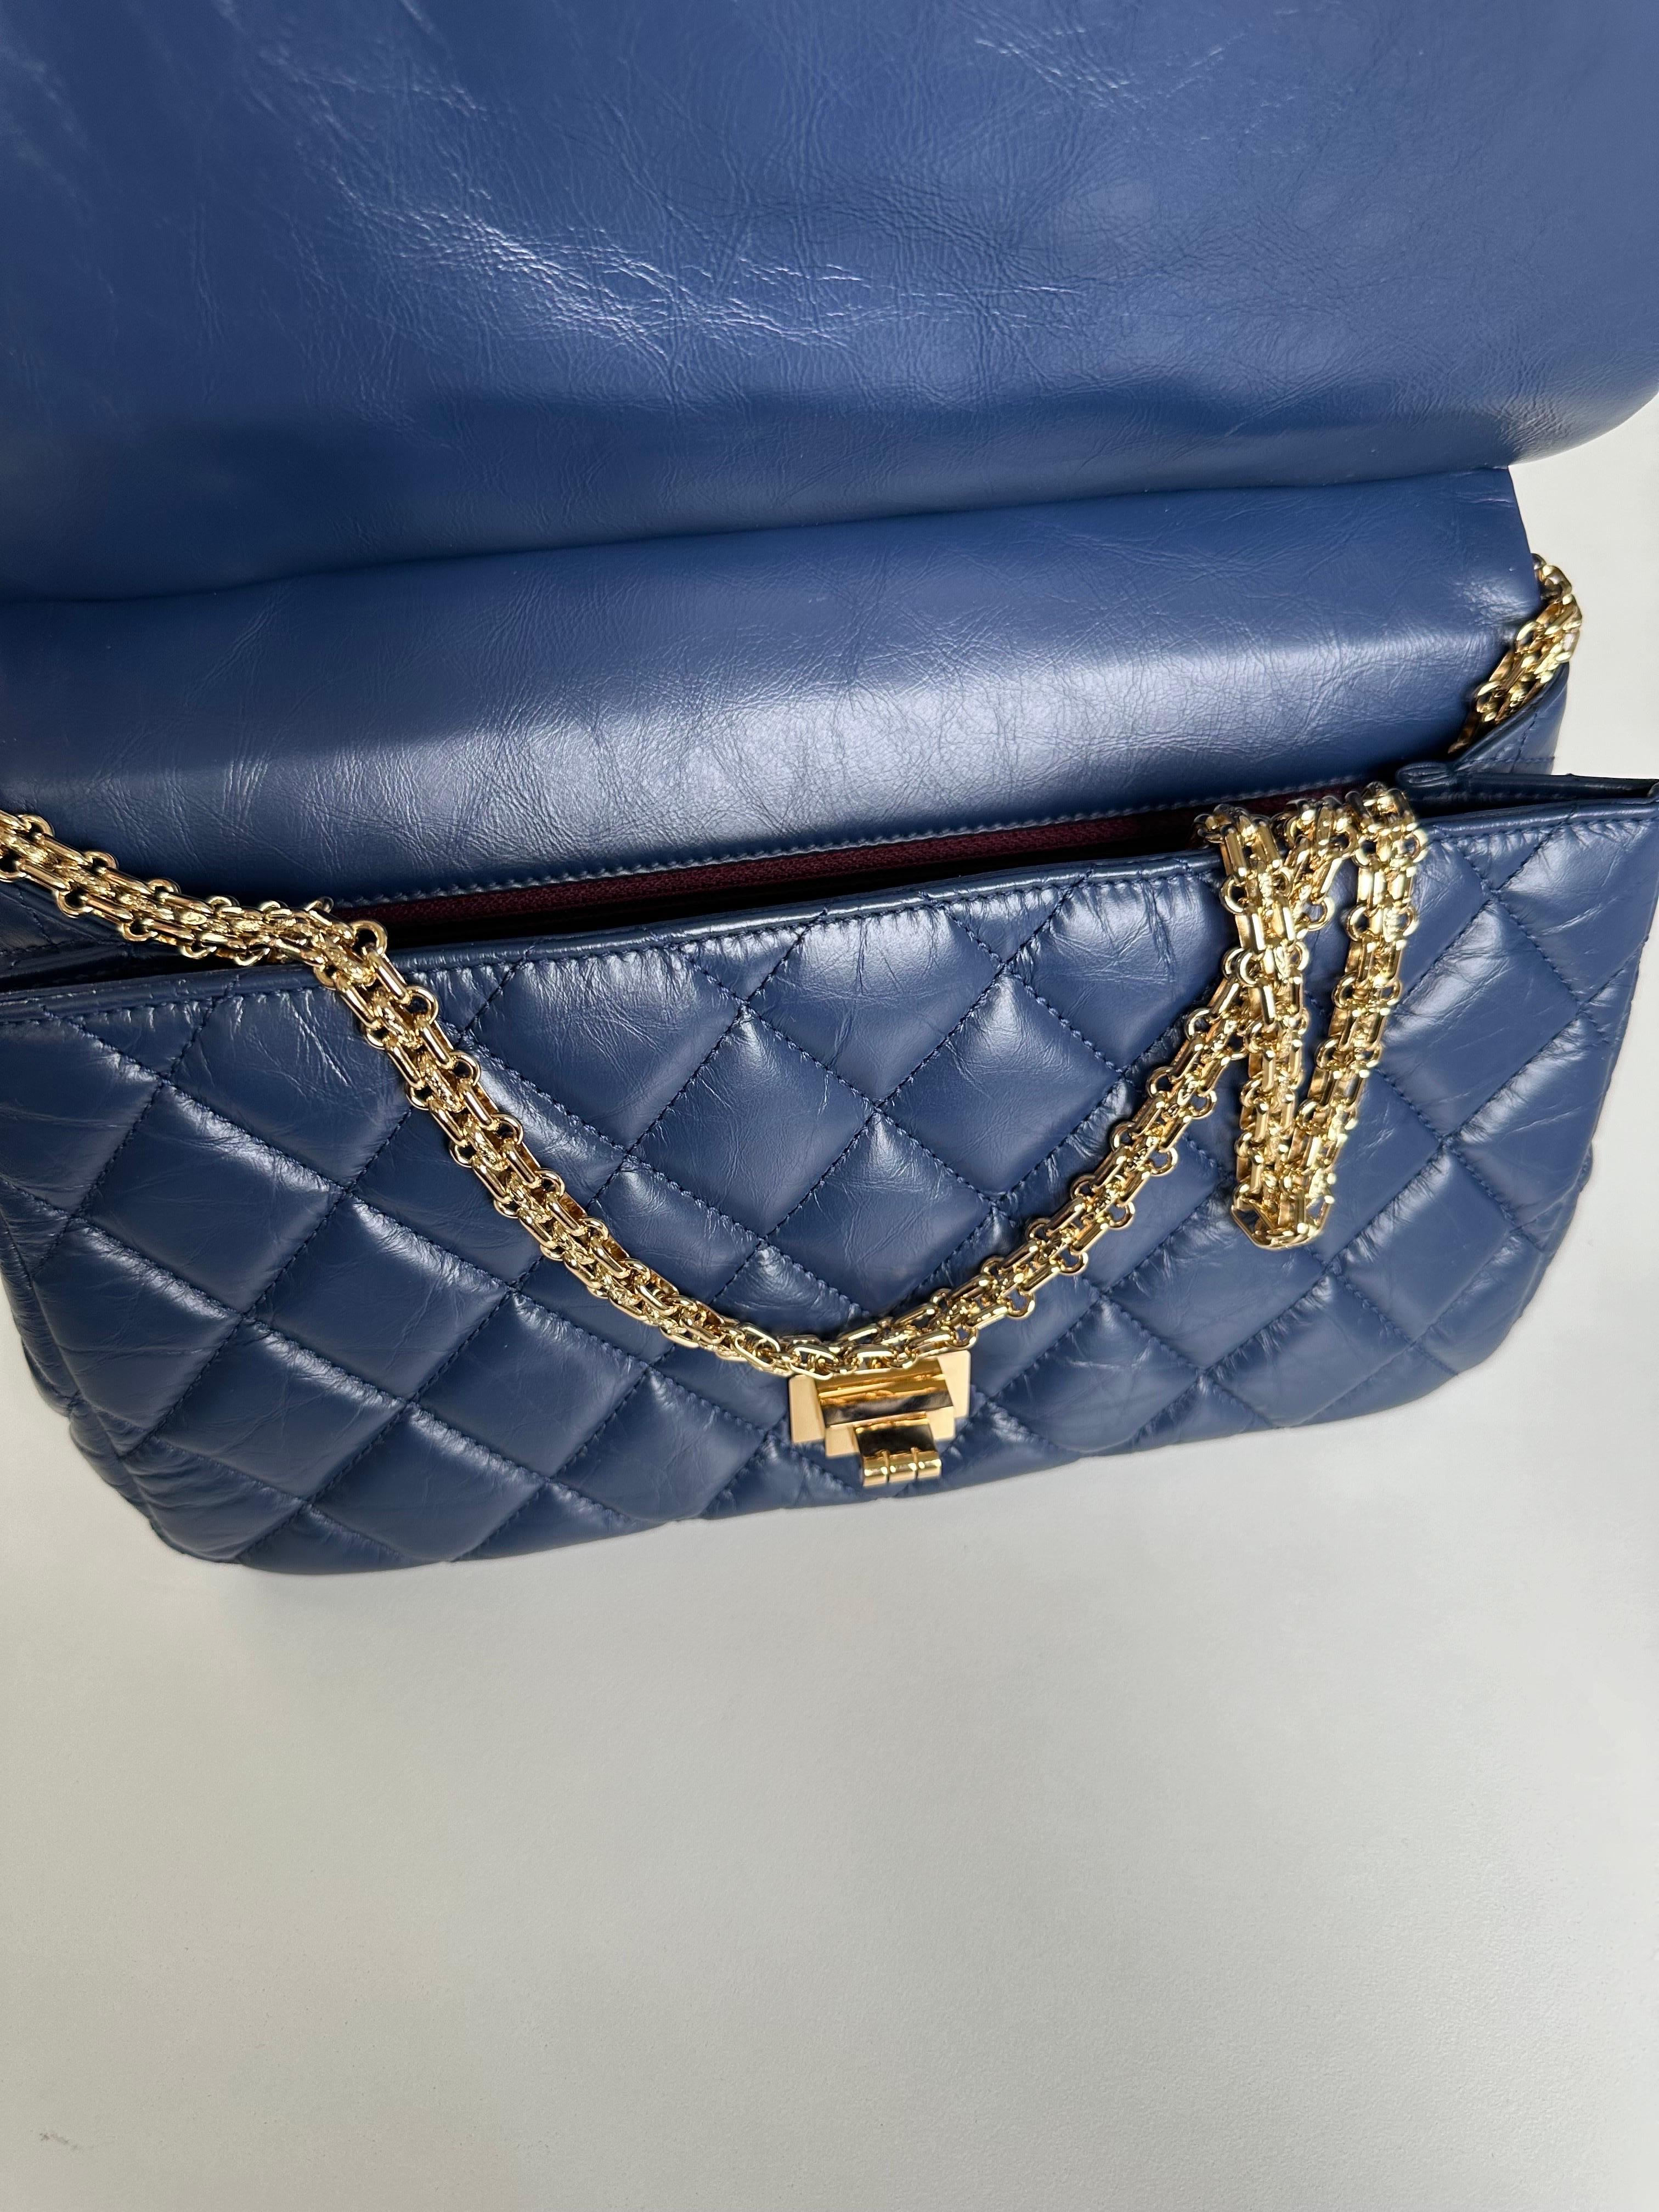 Chanel 2016 Limited Editiion 2.55 Reissue Rare Hanger Navy Blue Classic Flap Bag 5